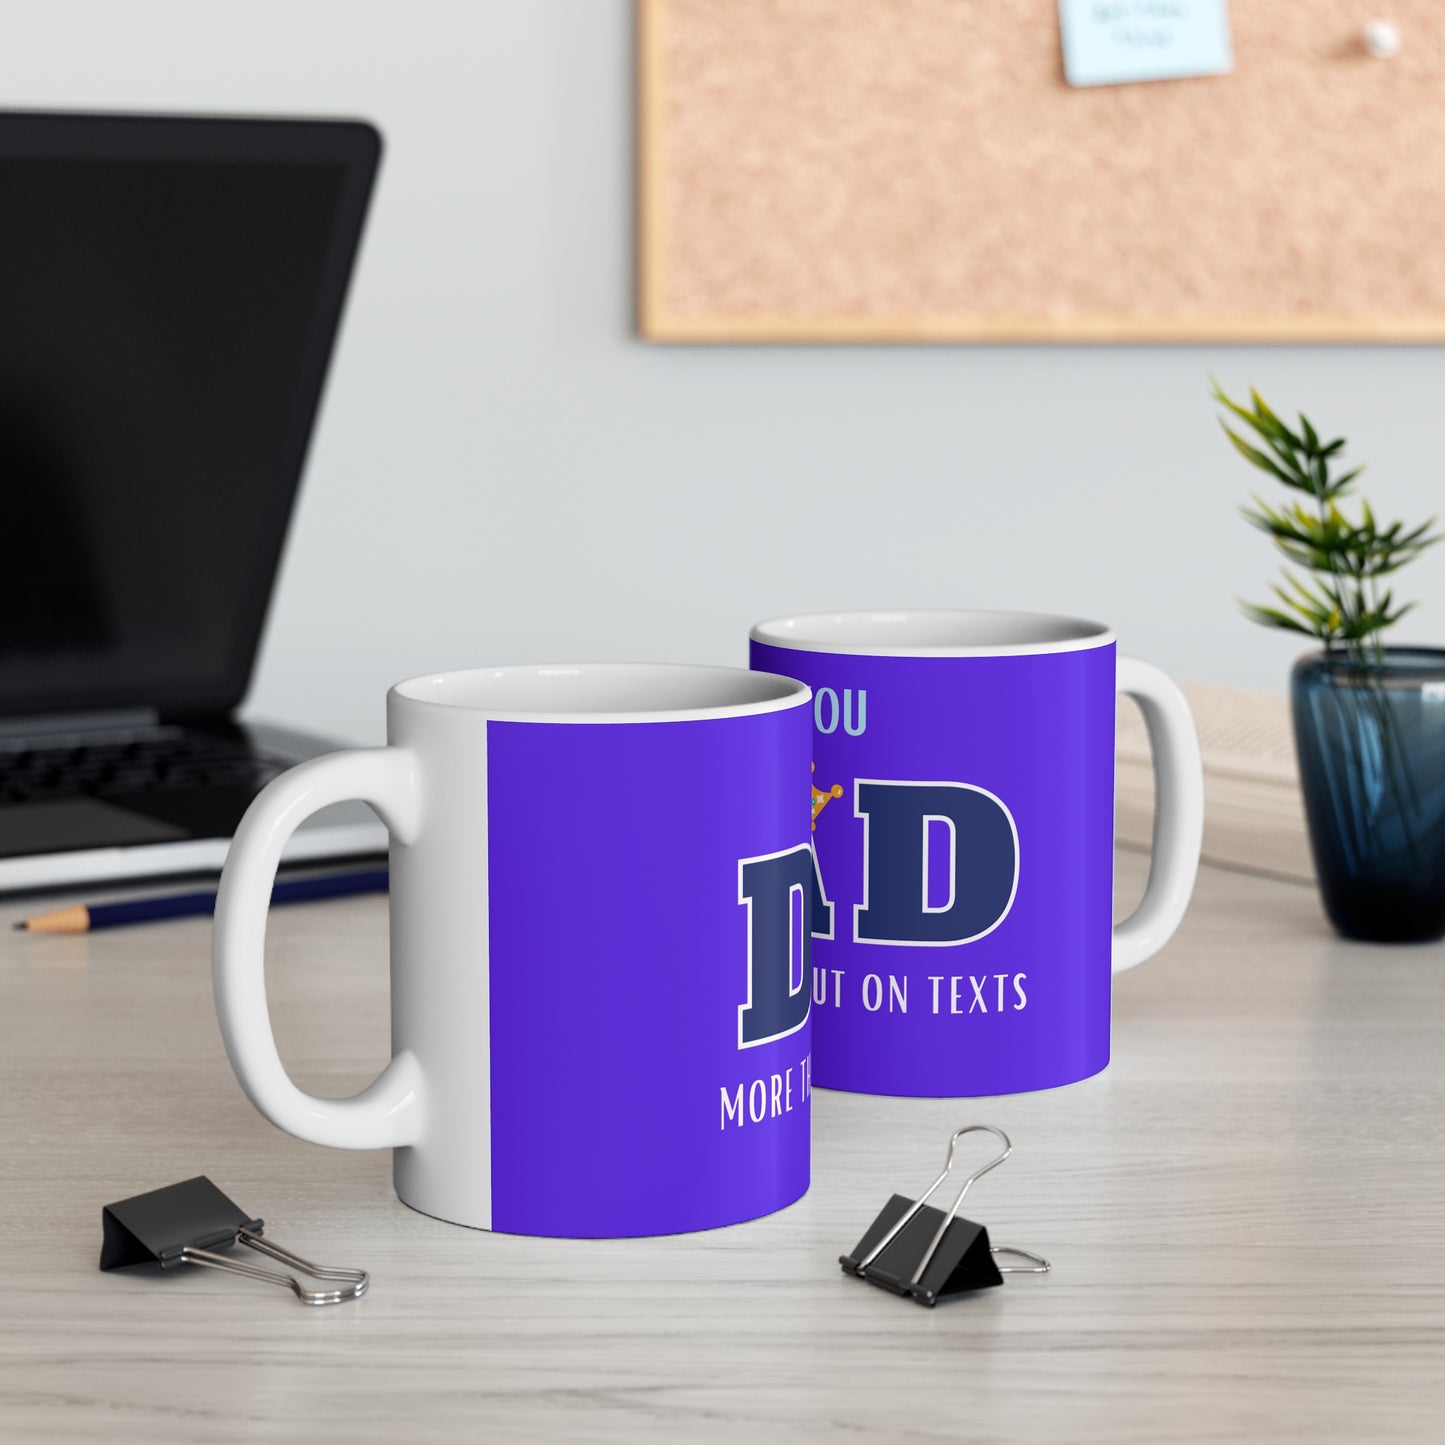 “I LOVE YOU DAD MORE THAN I CAN PUT ON TEXTS” coffee mug for that special dad. Texts are limited that way.